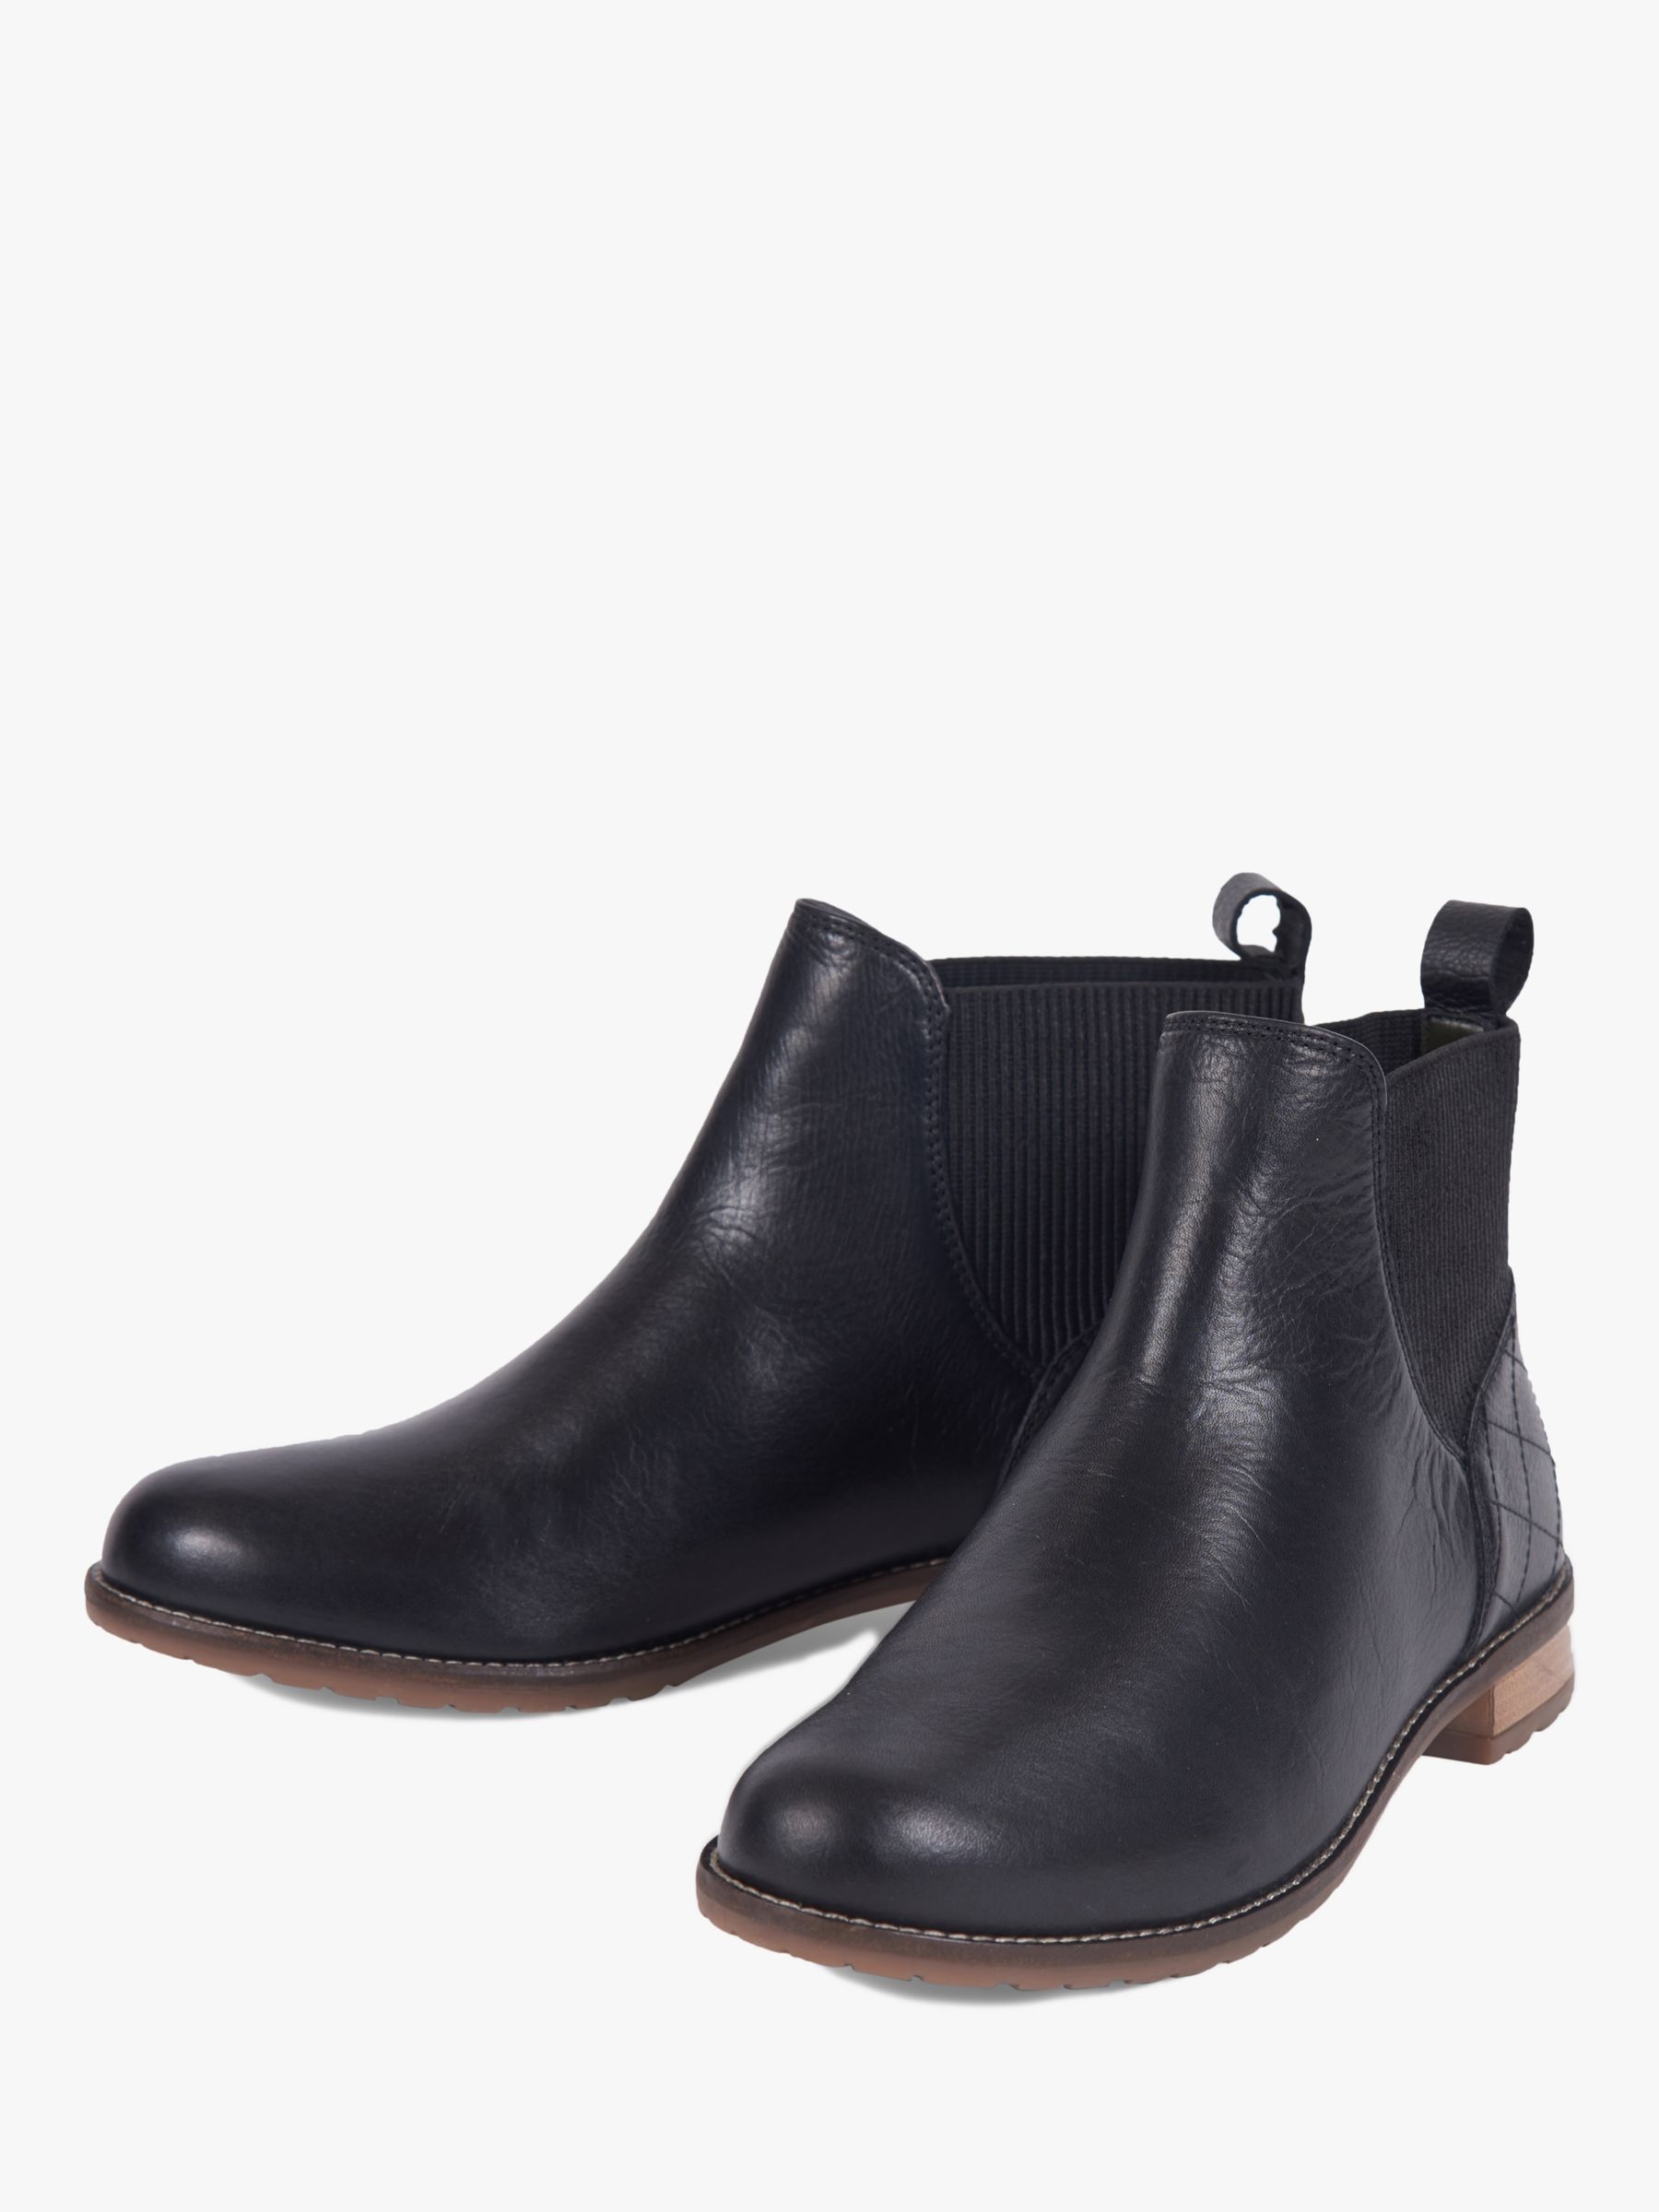 barbour hope chelsea boots